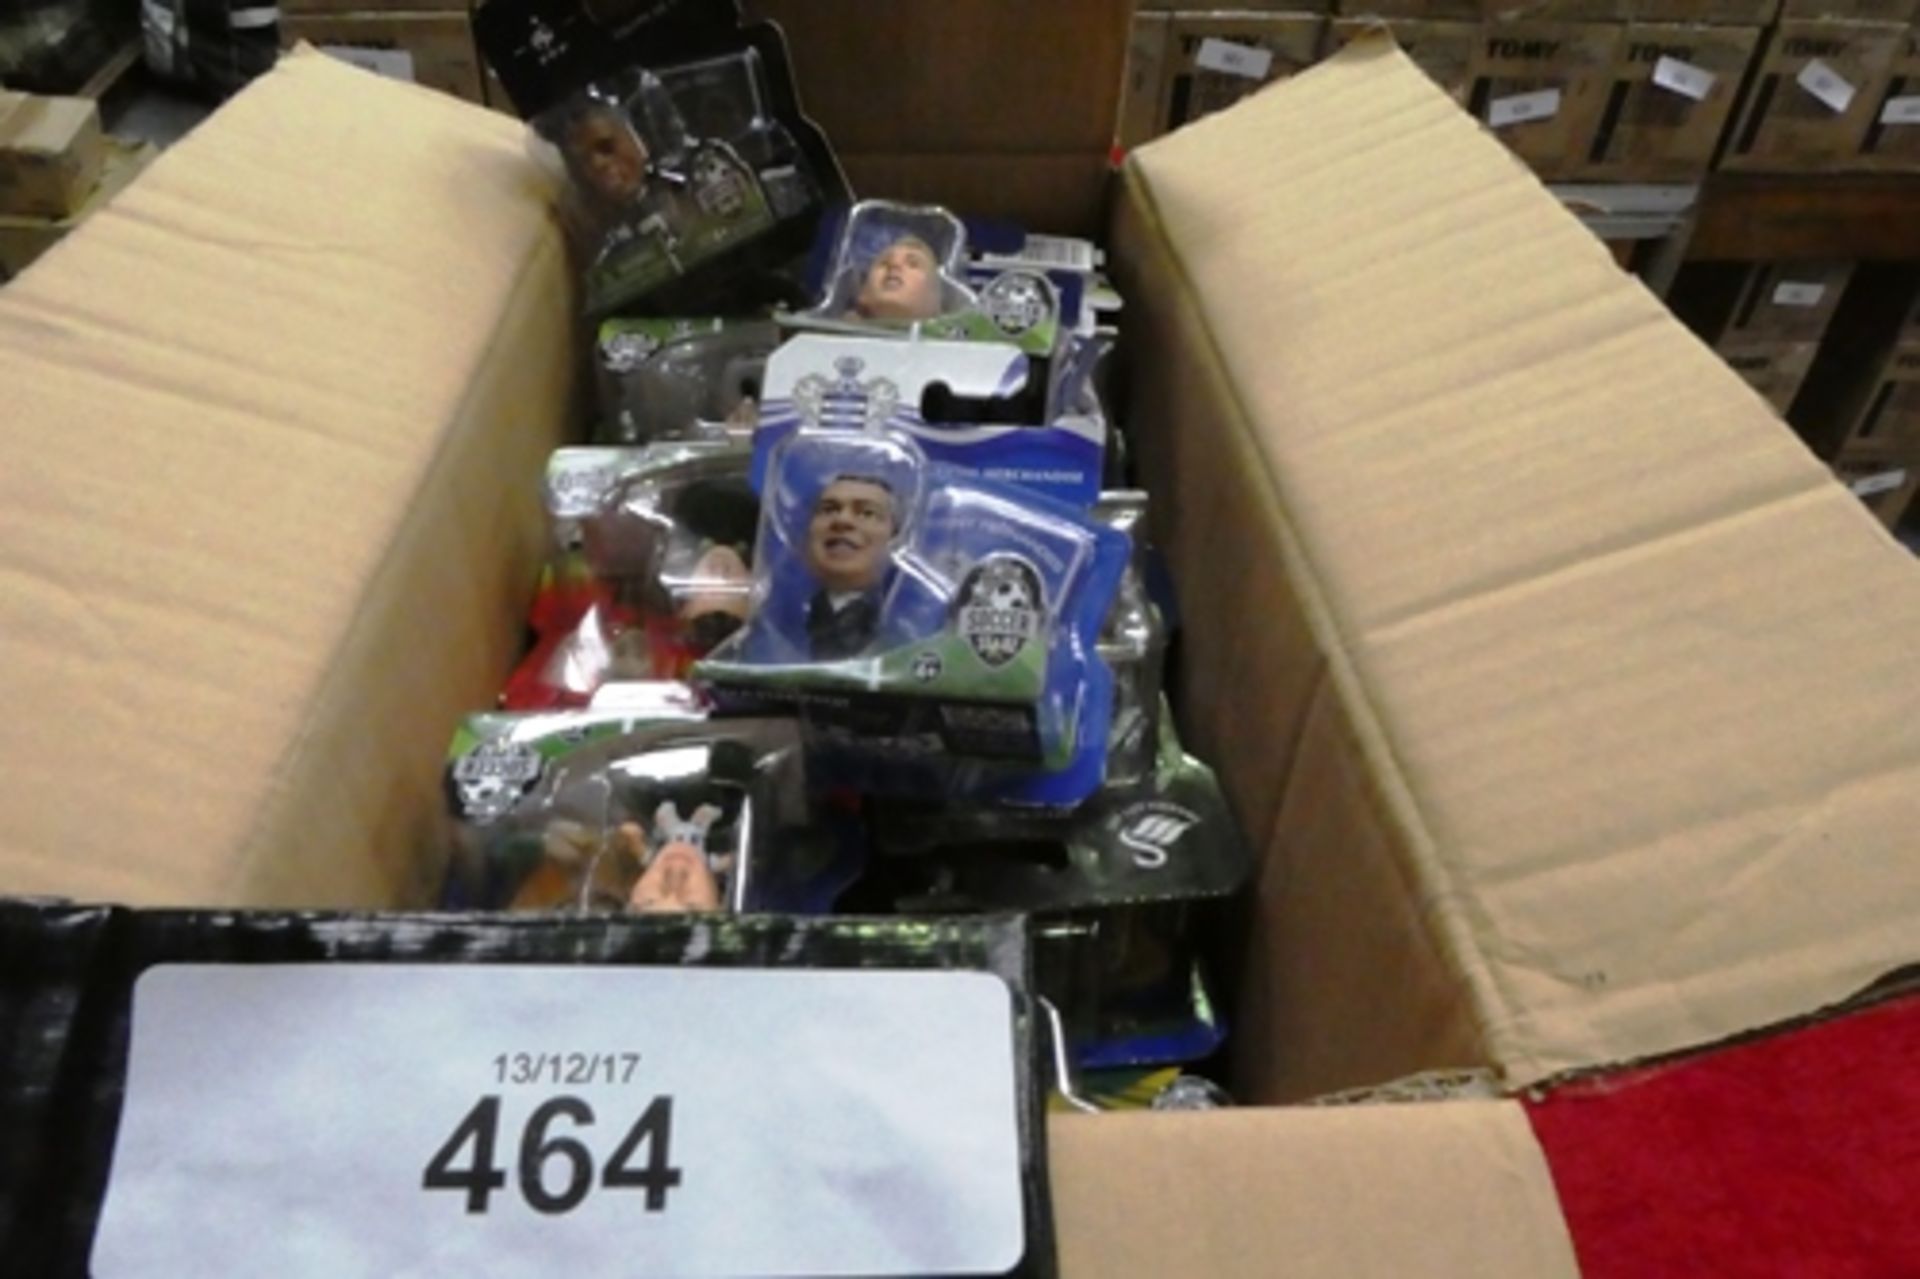 A box of 50 soccer starz action figures including Everton, LFC and Germany etc. - Sealed new in